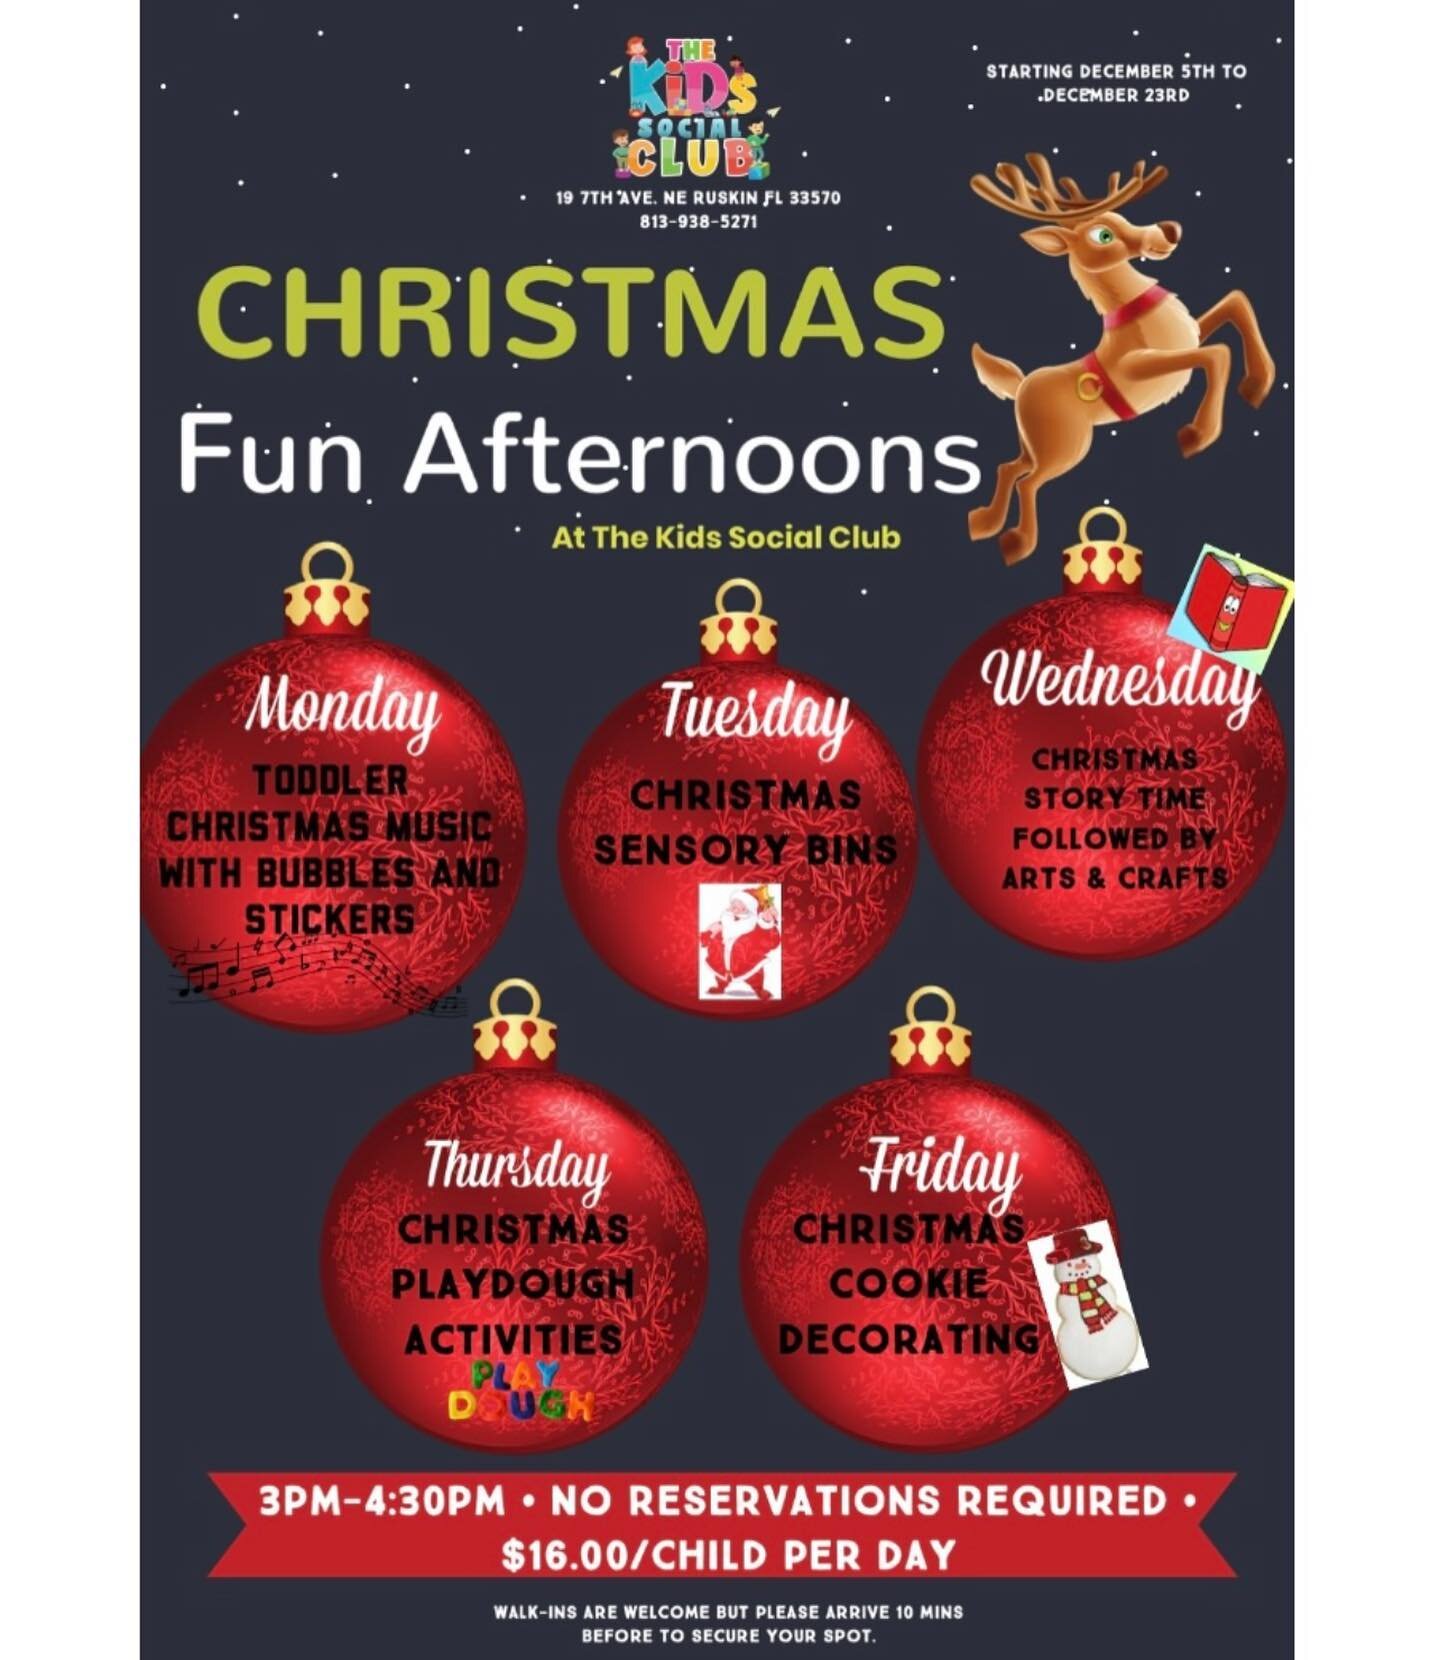 Christmas Fun Afternoons at our Club! 

Starting December 5th join us for open play with fun and interactive holiday activities for the littles 🎄🎅🏻

Monday - Toddler Christmas Music with bubbles and stickers 

Tuesday- Christmas Sensory Bins 

Wed